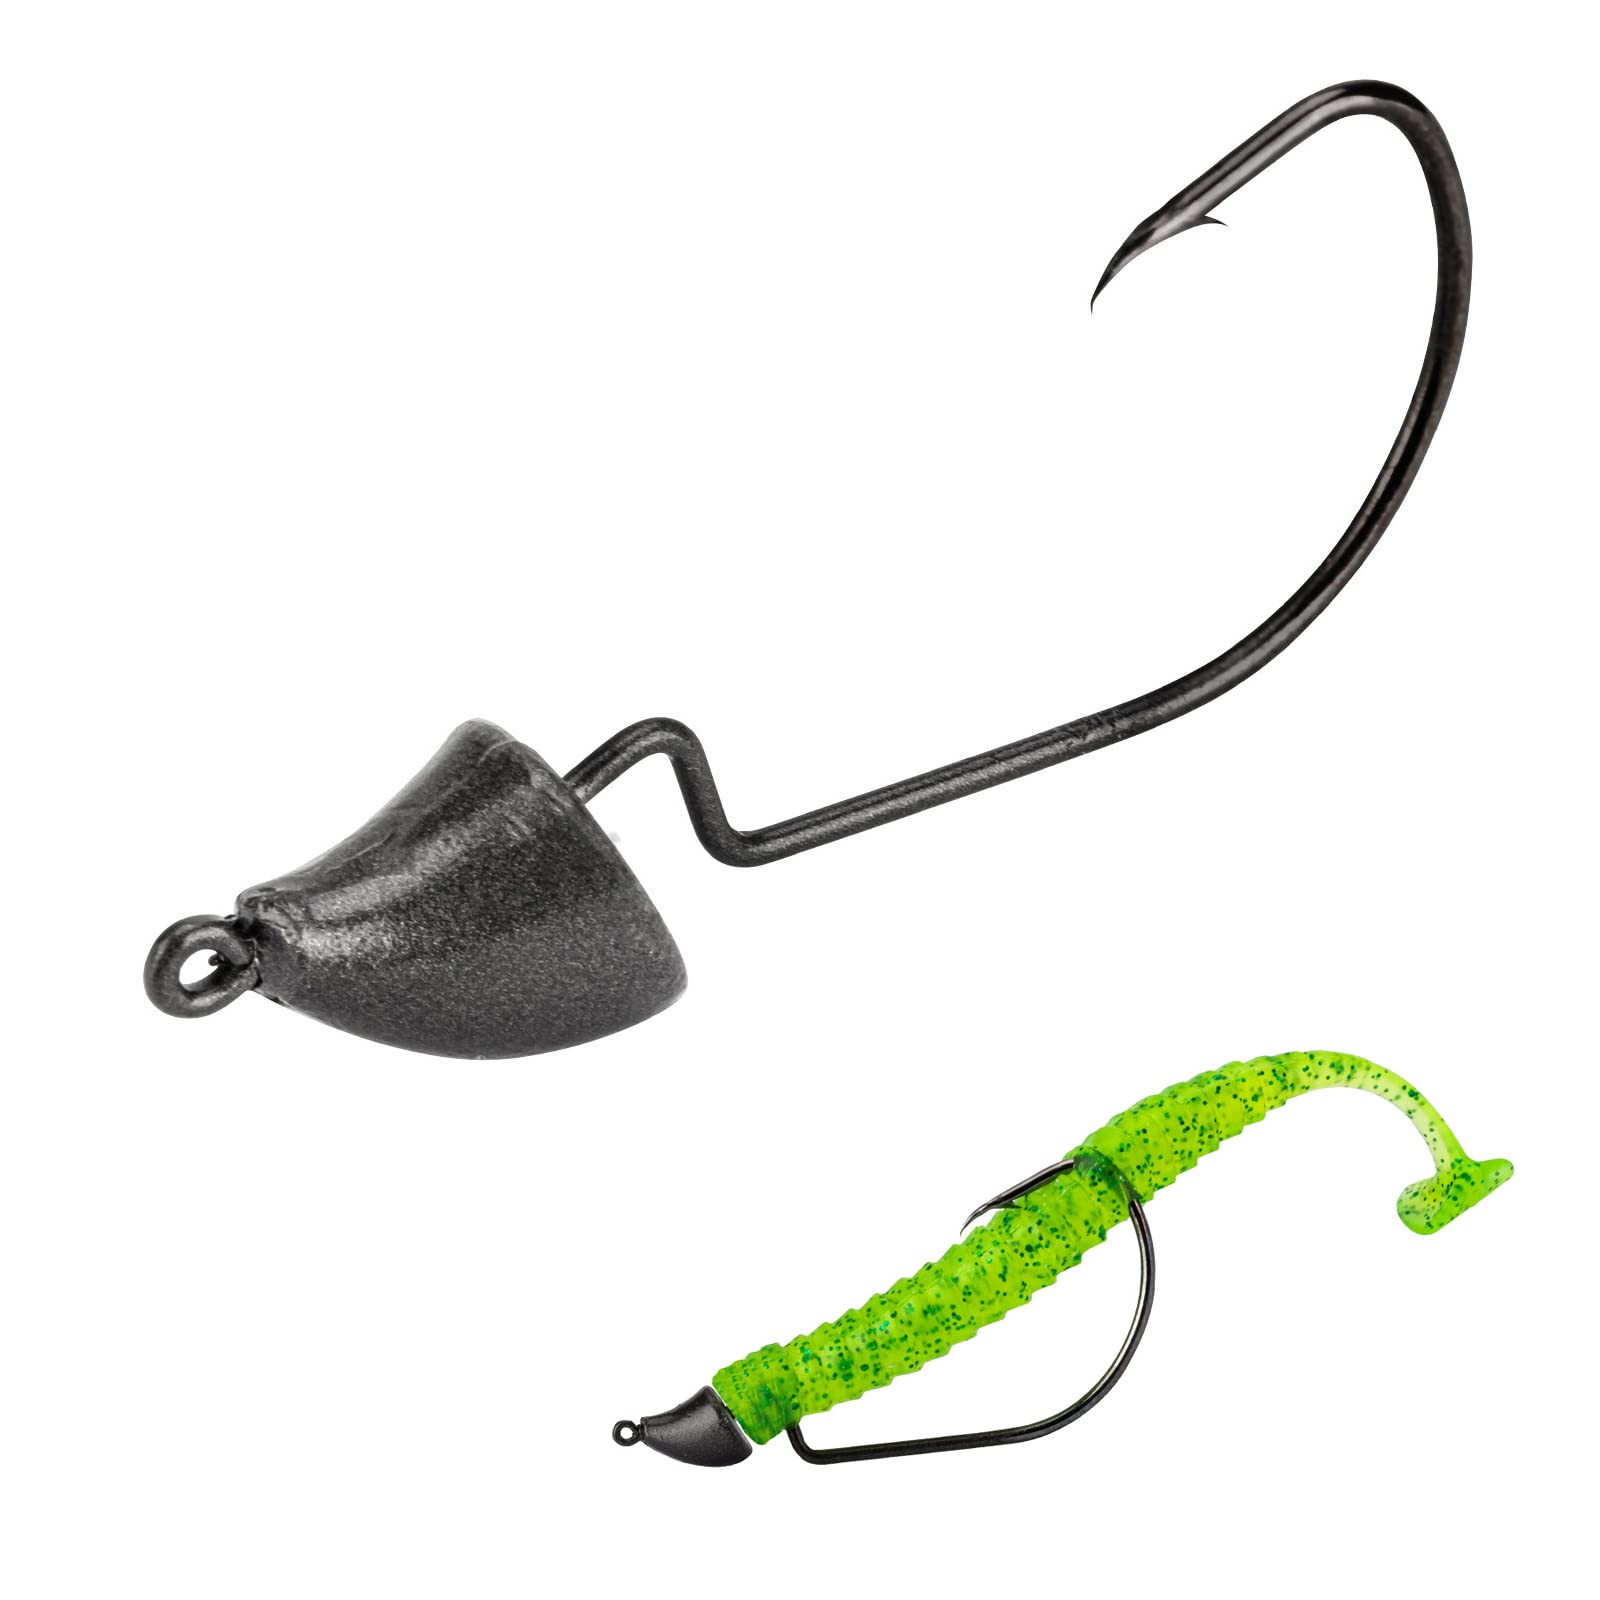  MAFIMOEA Bullet Jig Heads Weighted Texas Rig Hooks Swimbait  Hooks Bass Crappie Walleye Trout Fishing Weedless Swimbait Jig Heads  Saltwater Freshwater : Sports & Outdoors